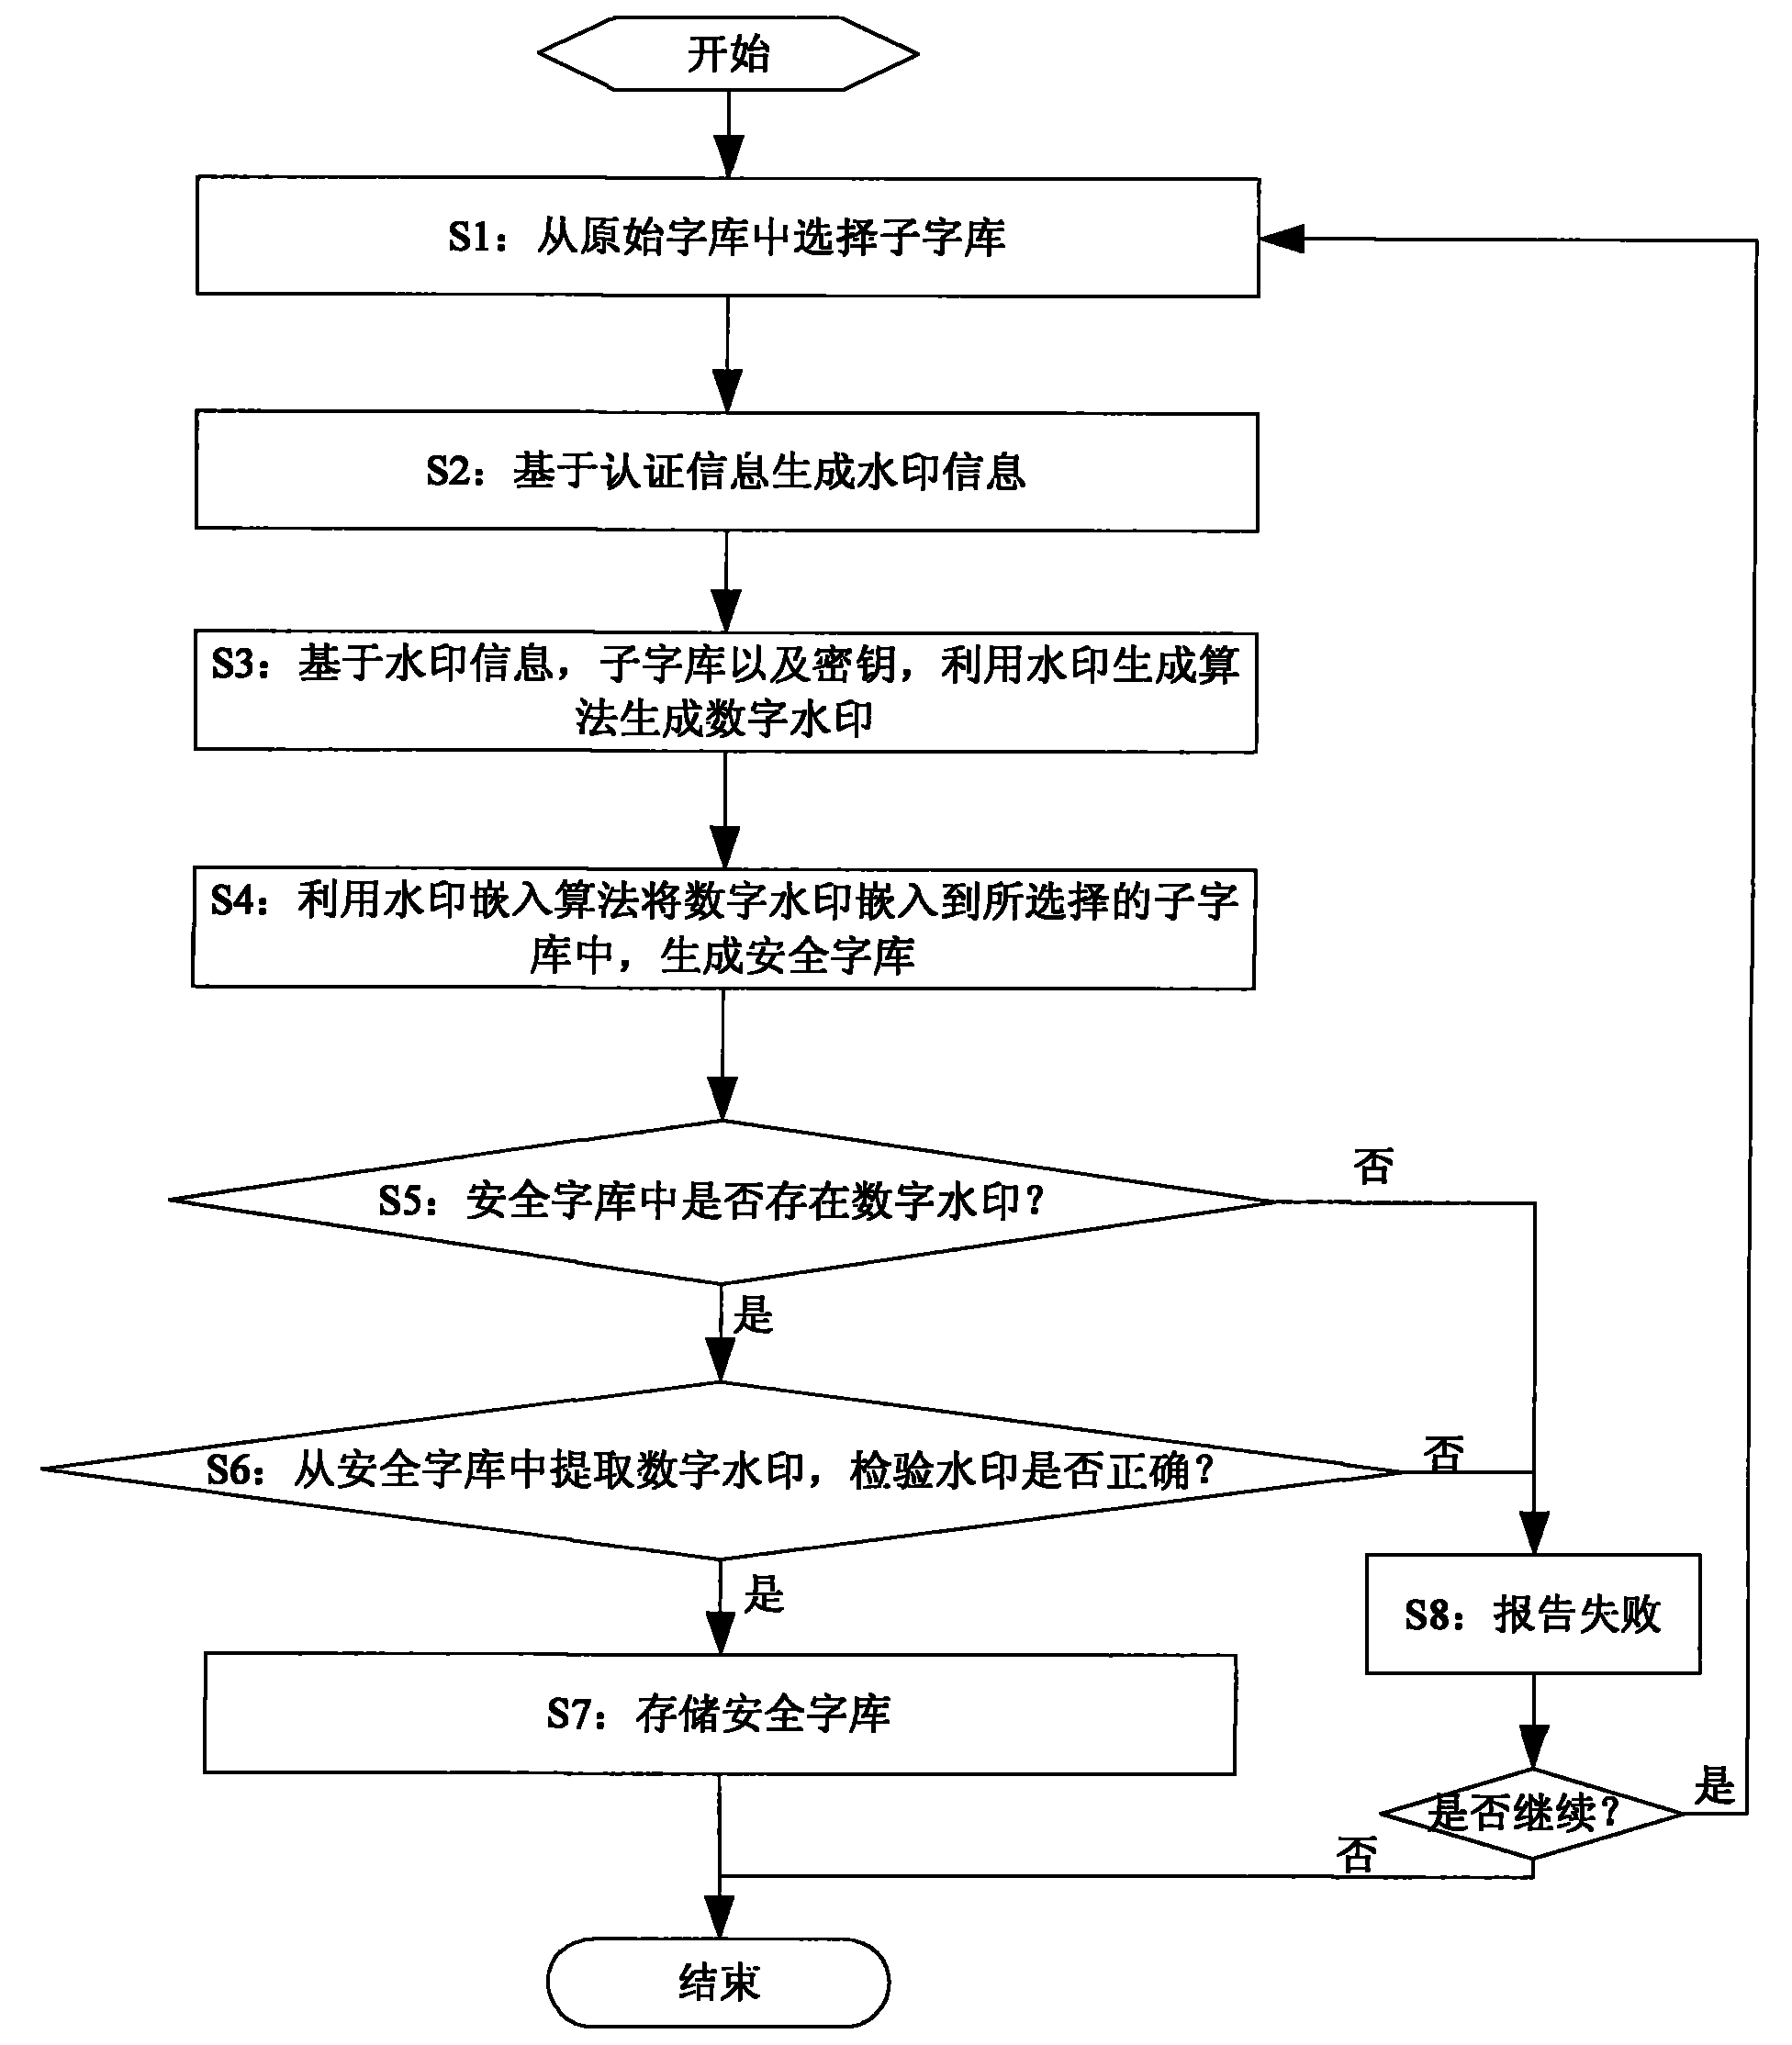 Method and system for generating digital watermark-based safe word stock